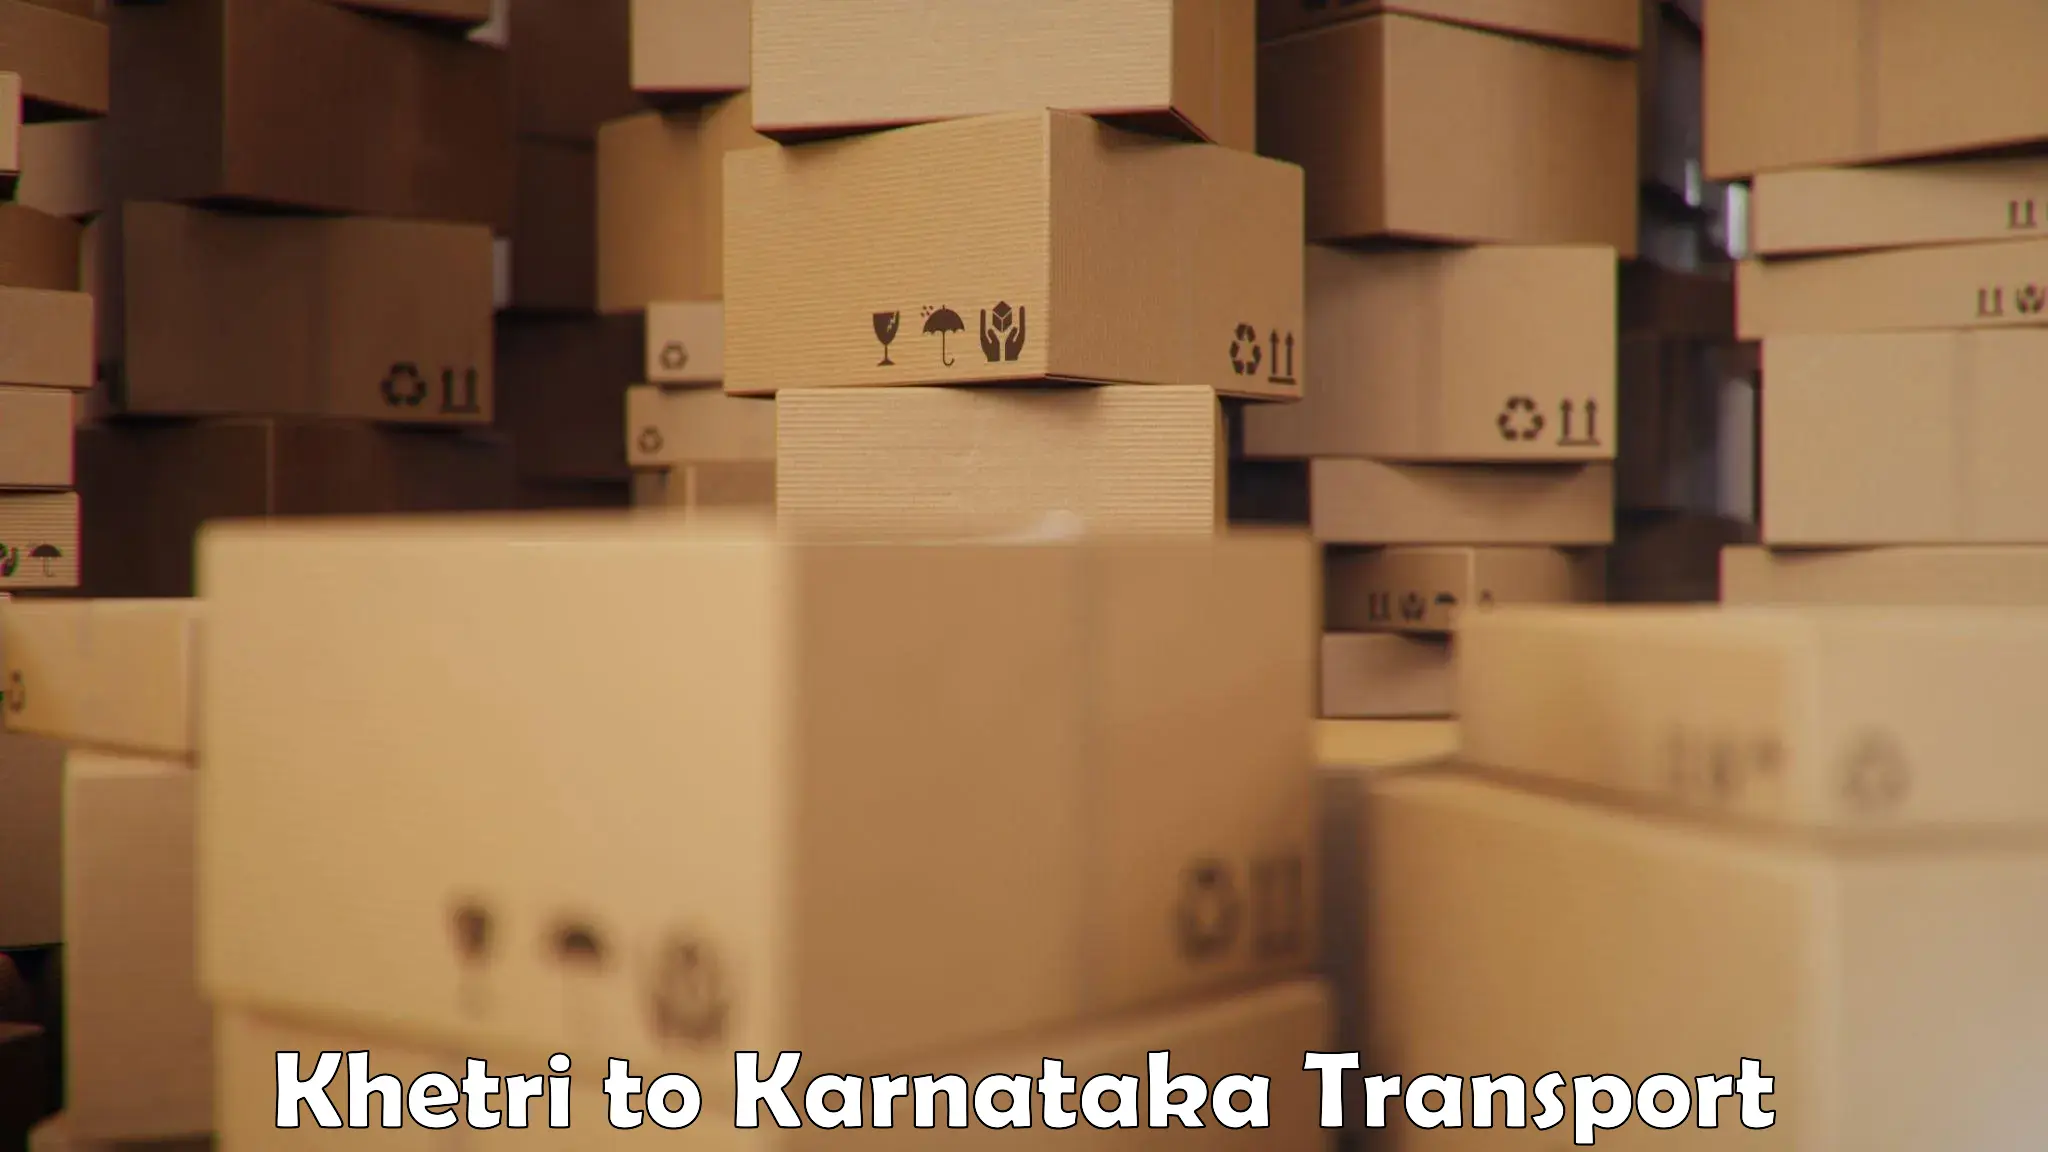 Luggage transport services in Khetri to Mangalore Port